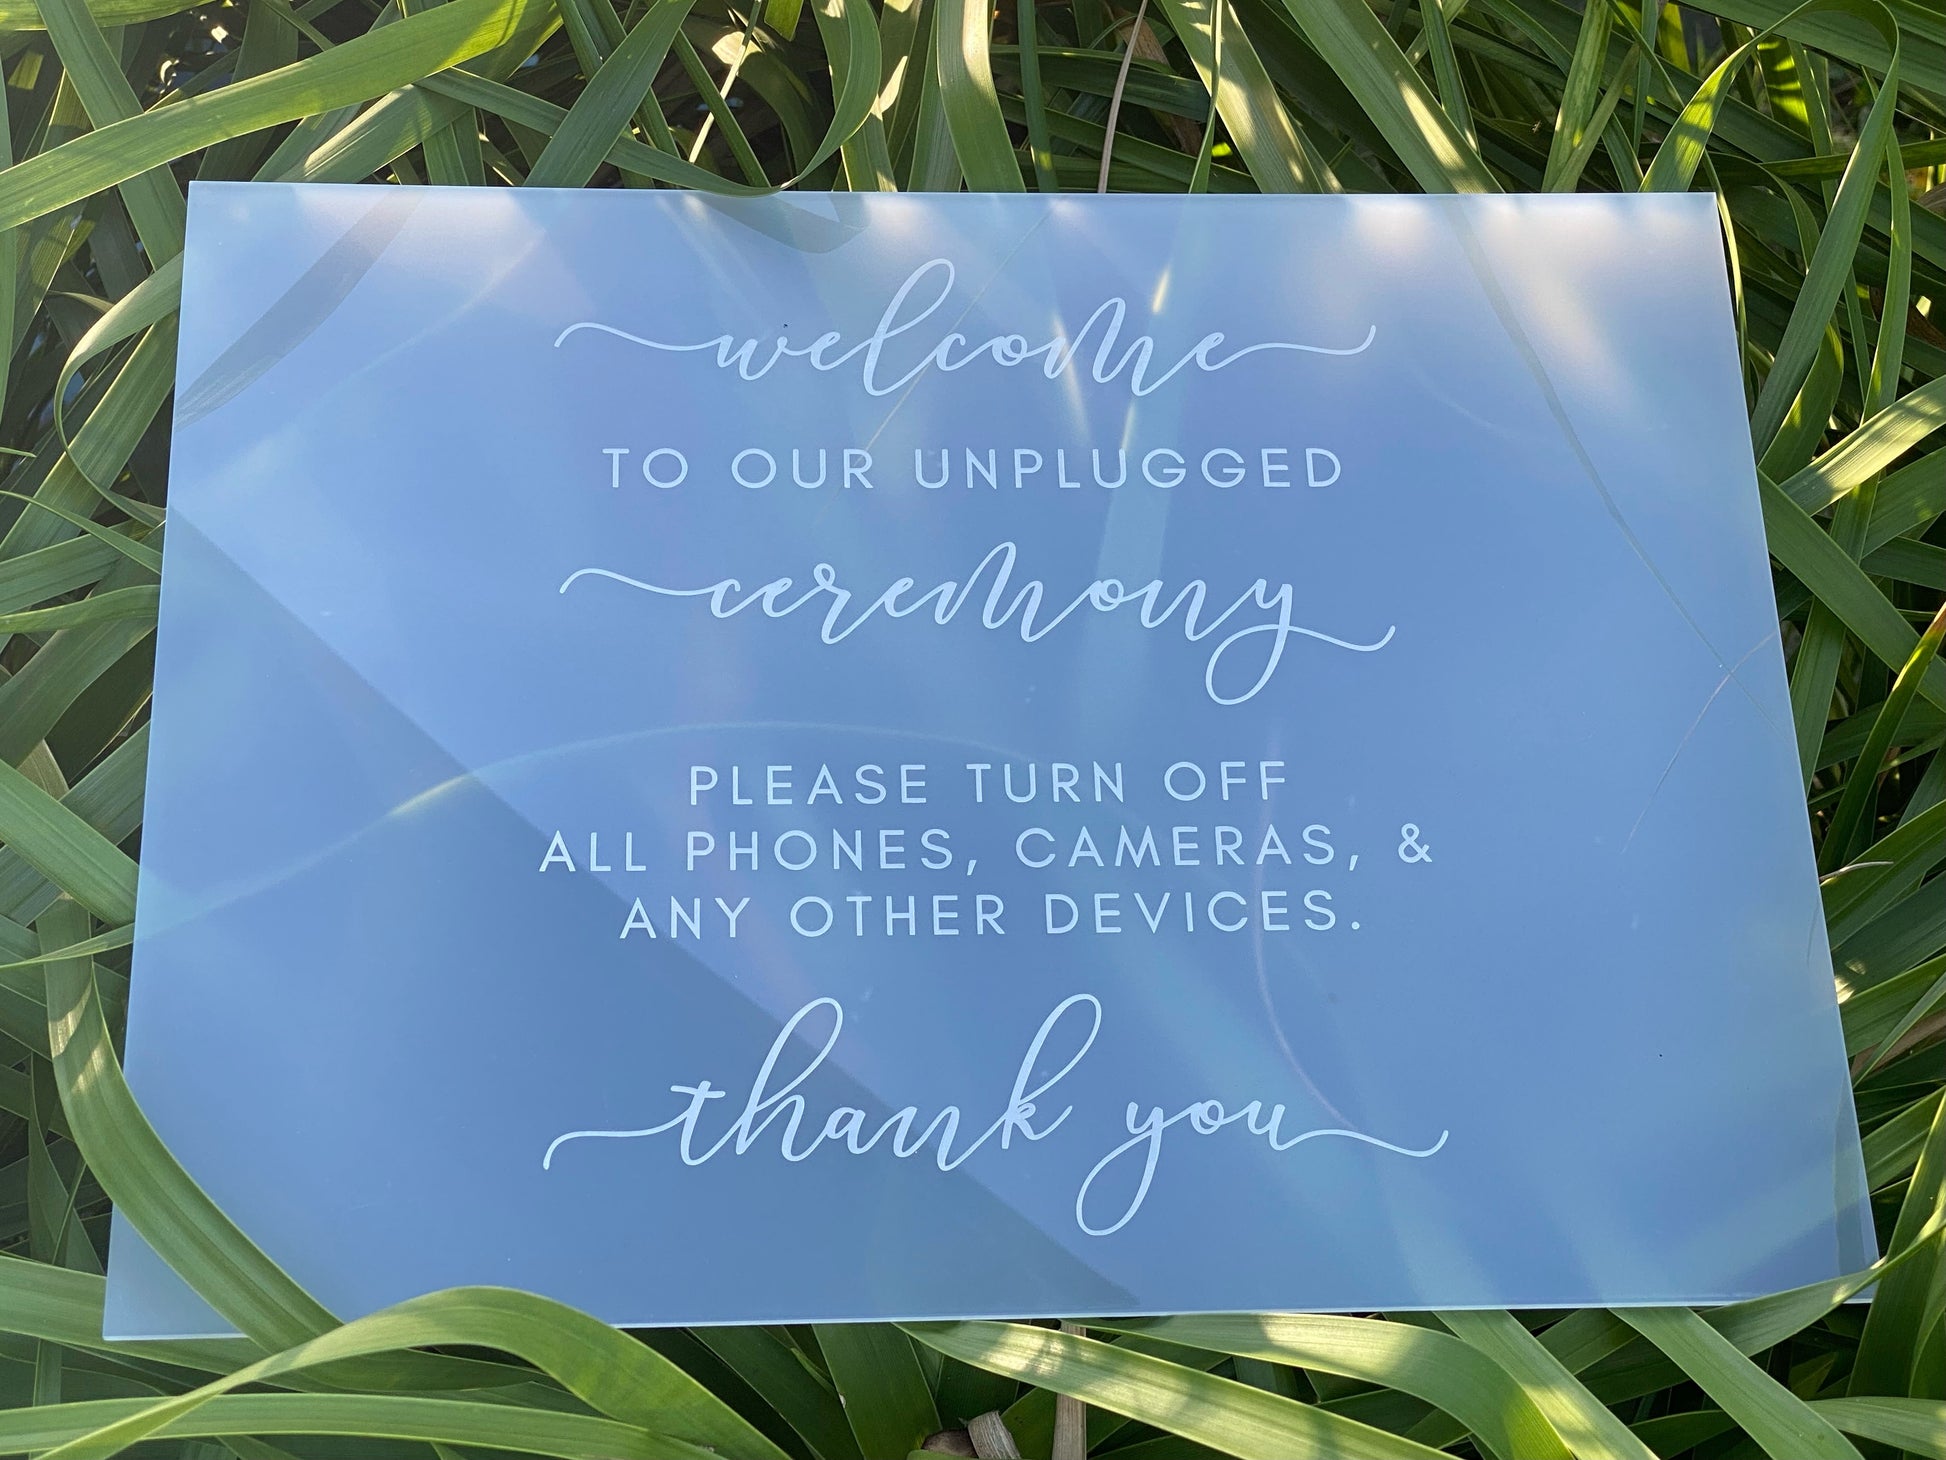 Frosted acrylic sign with laser engraved design, perfect to display for your unplugged wedding ceremony